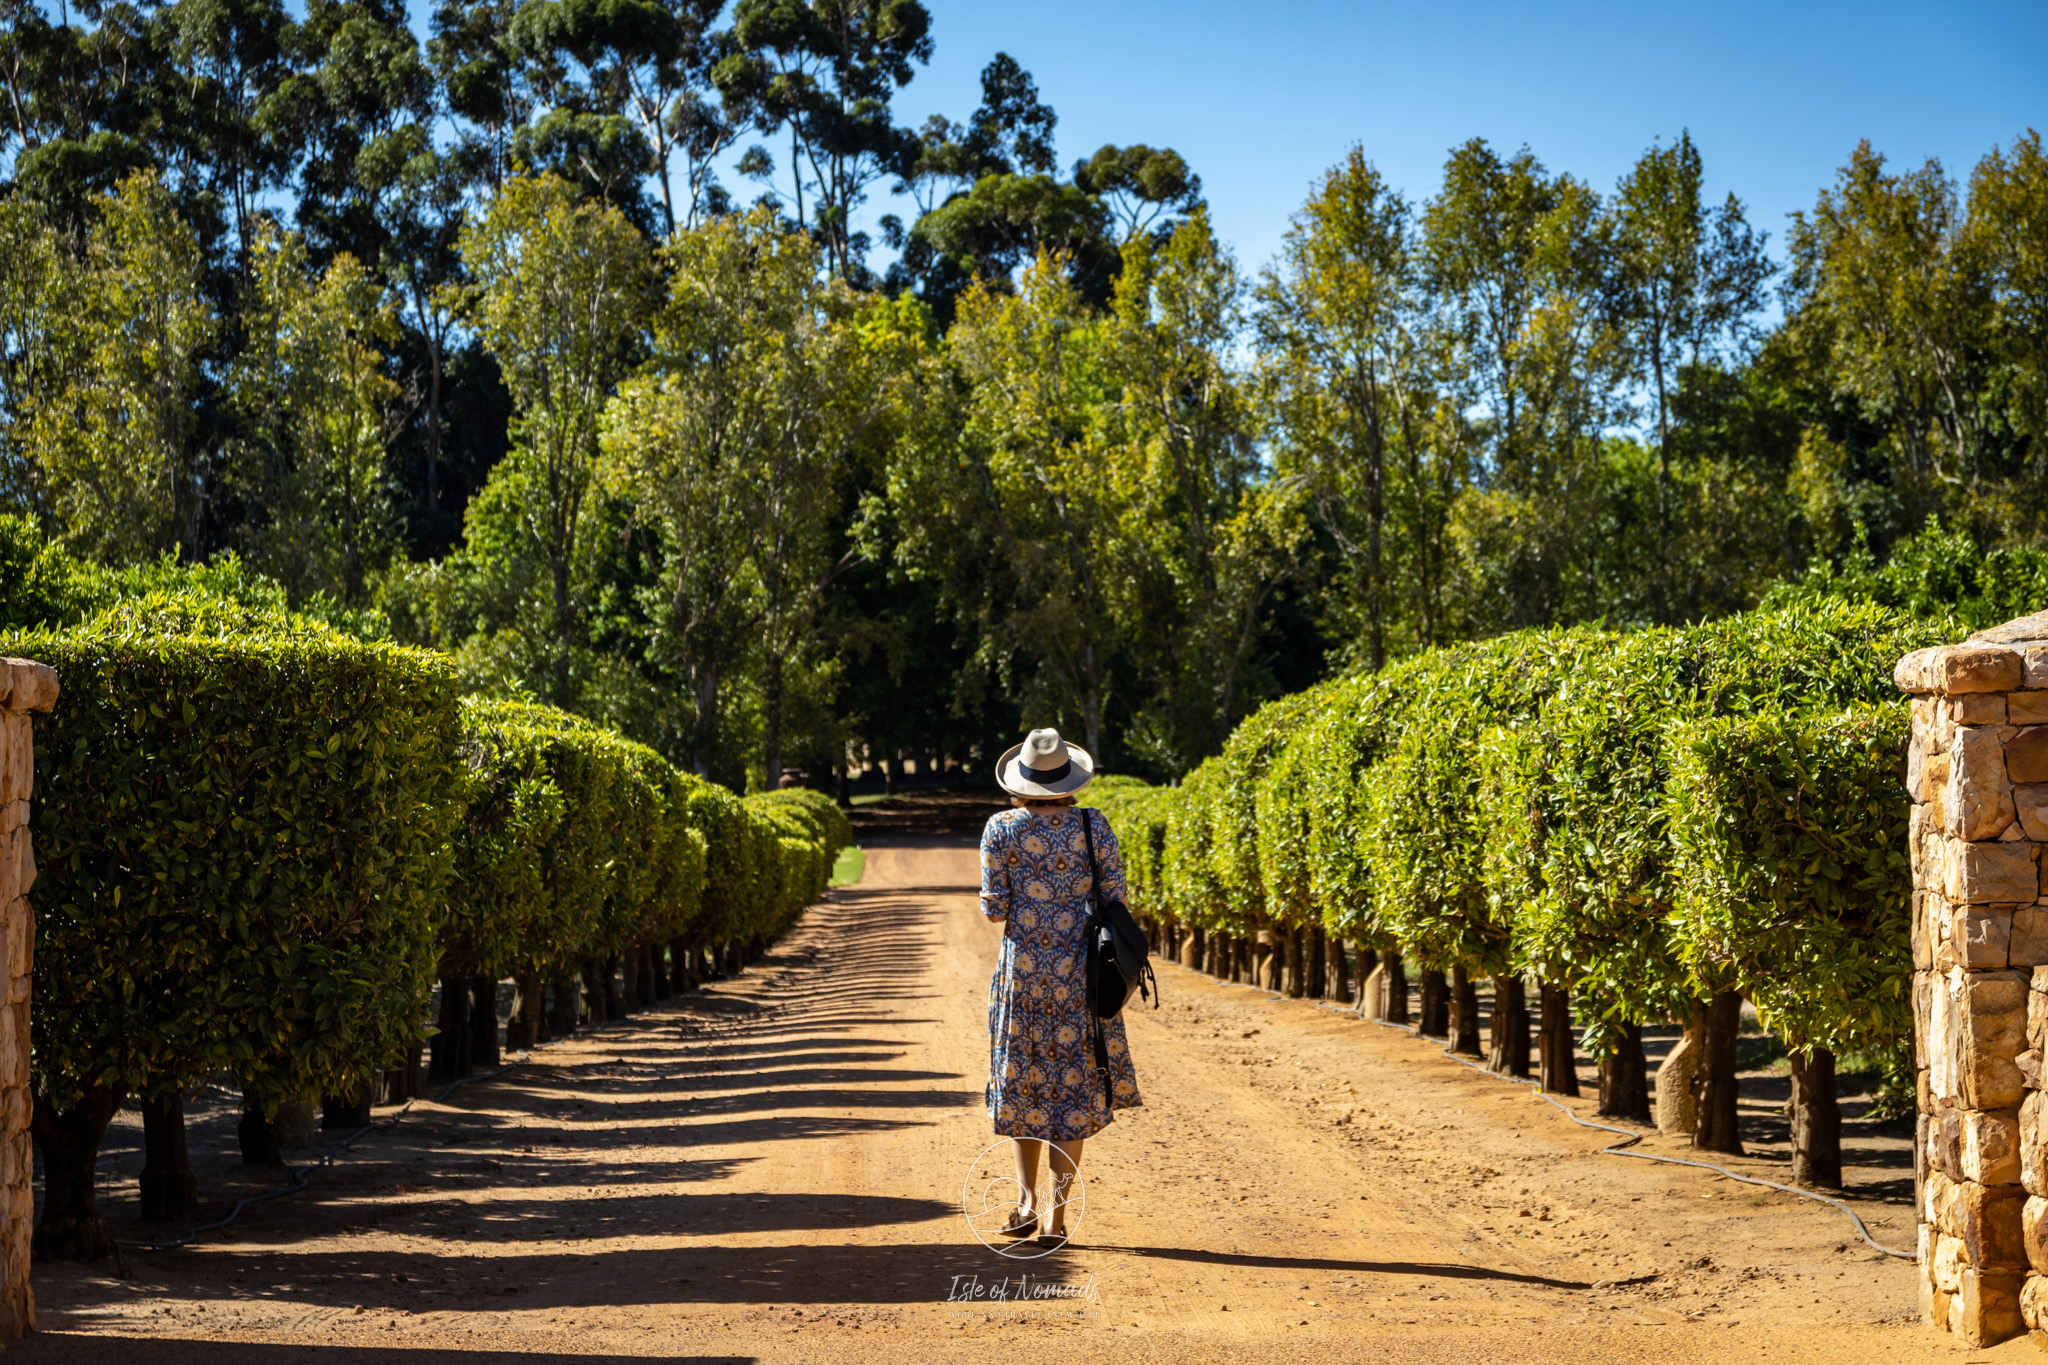 The Wine Region in South Africa is worth a visit just to see the beautiful estates